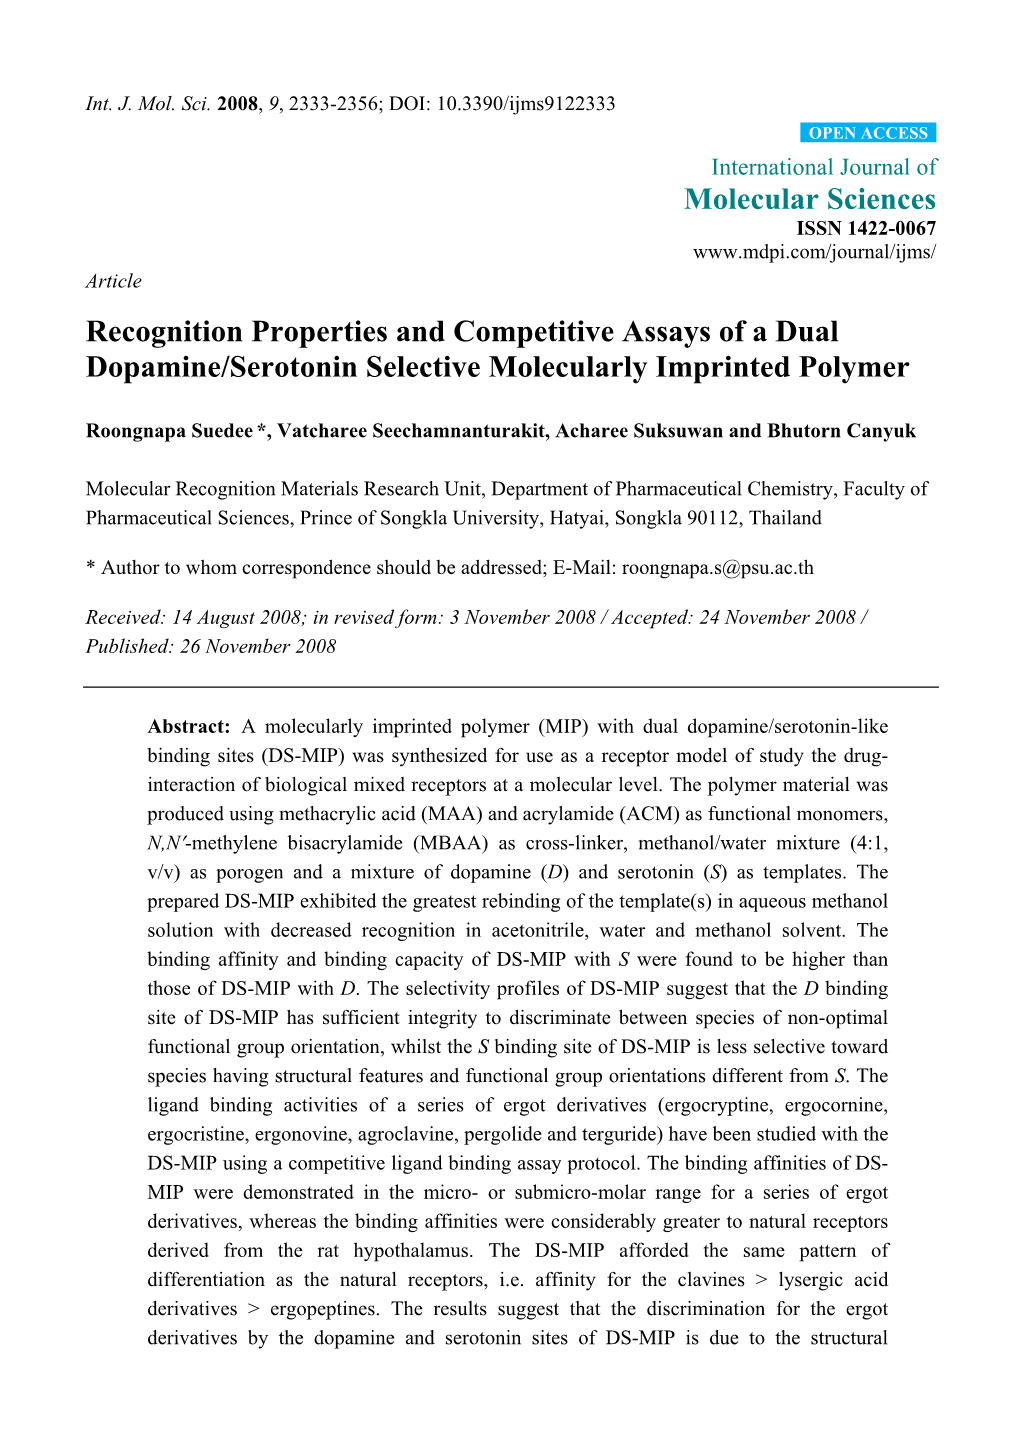 Recognition Properties and Competitive Assays of a Dual Dopamine/Serotonin Selective Molecularly Imprinted Polymer